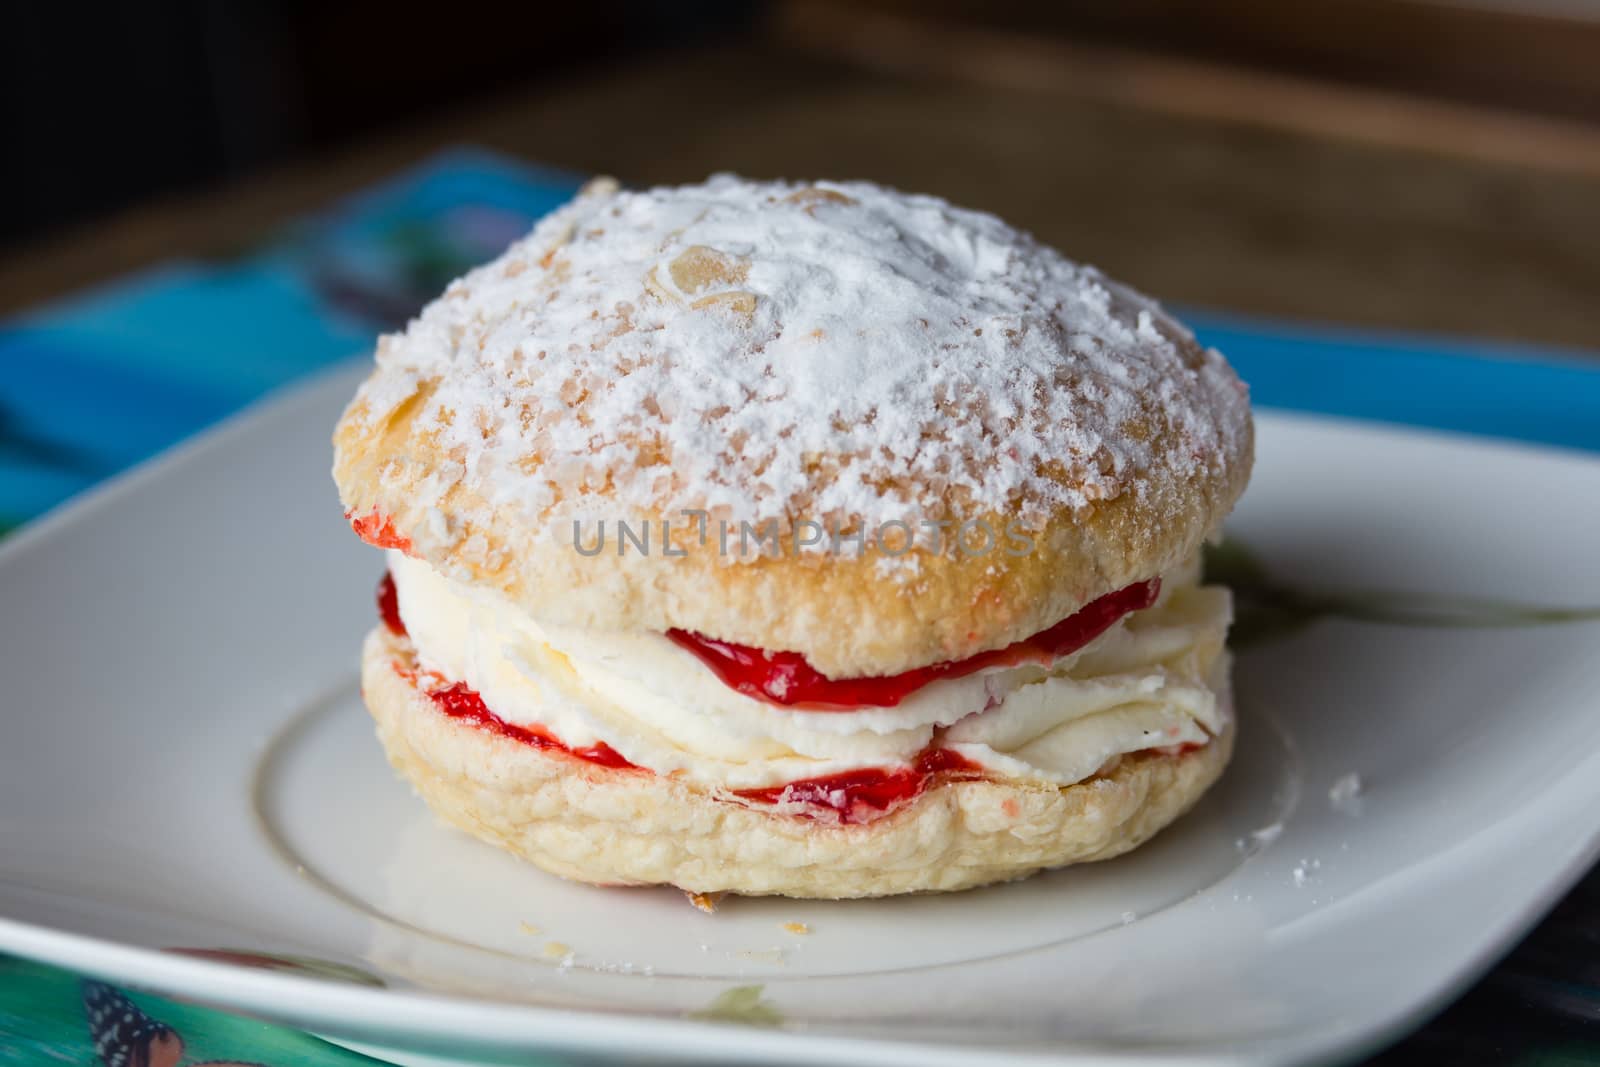 Bun of tender puff pastry with white custard and strawberry jam